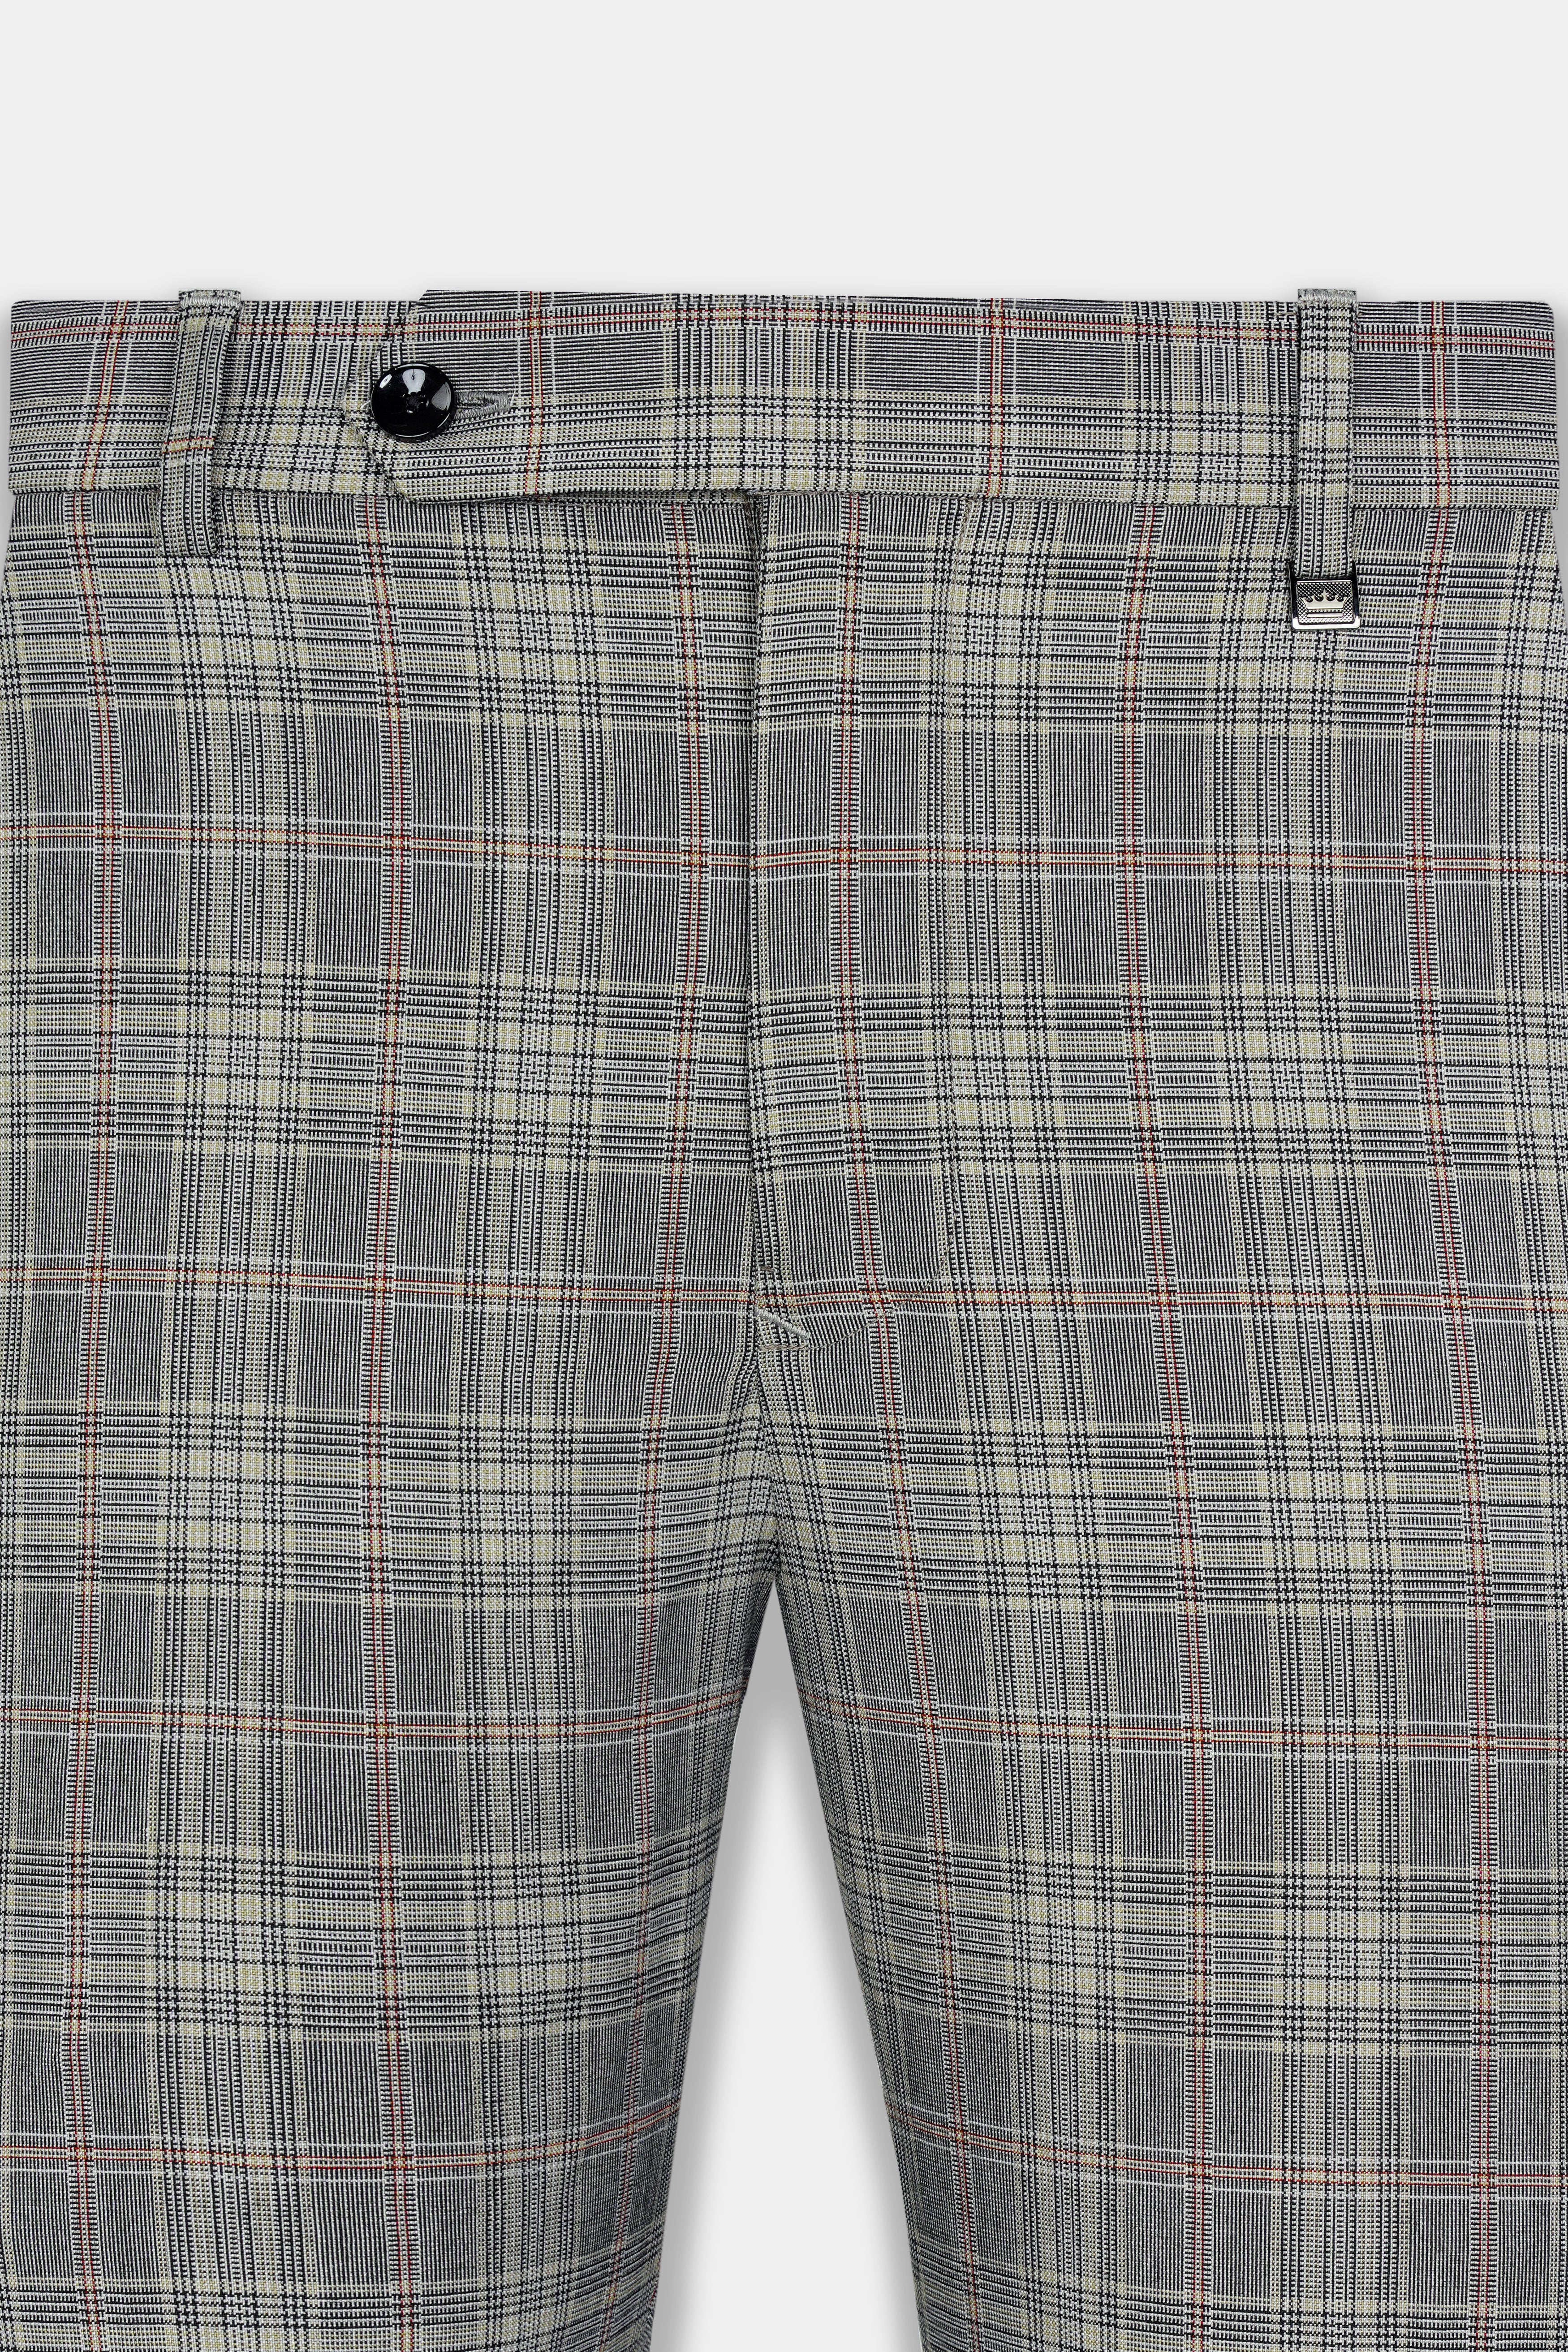 Chalice Gray Plaid and Black Wool Rich Designer Suit ST2928-SBP-D73-36,ST2928-SBP-D73-38,ST2928-SBP-D73-40,ST2928-SBP-D73-42,ST2928-SBP-D73-44,ST2928-SBP-D73-46,ST2928-SBP-D73-48,ST2928-SBP-D73-50,ST2928-SBP-D73-52,ST2928-SBP-D73-54,ST2928-SBP-D73-56,ST2928-SBP-D73-58,ST2928-SBP-D73-60